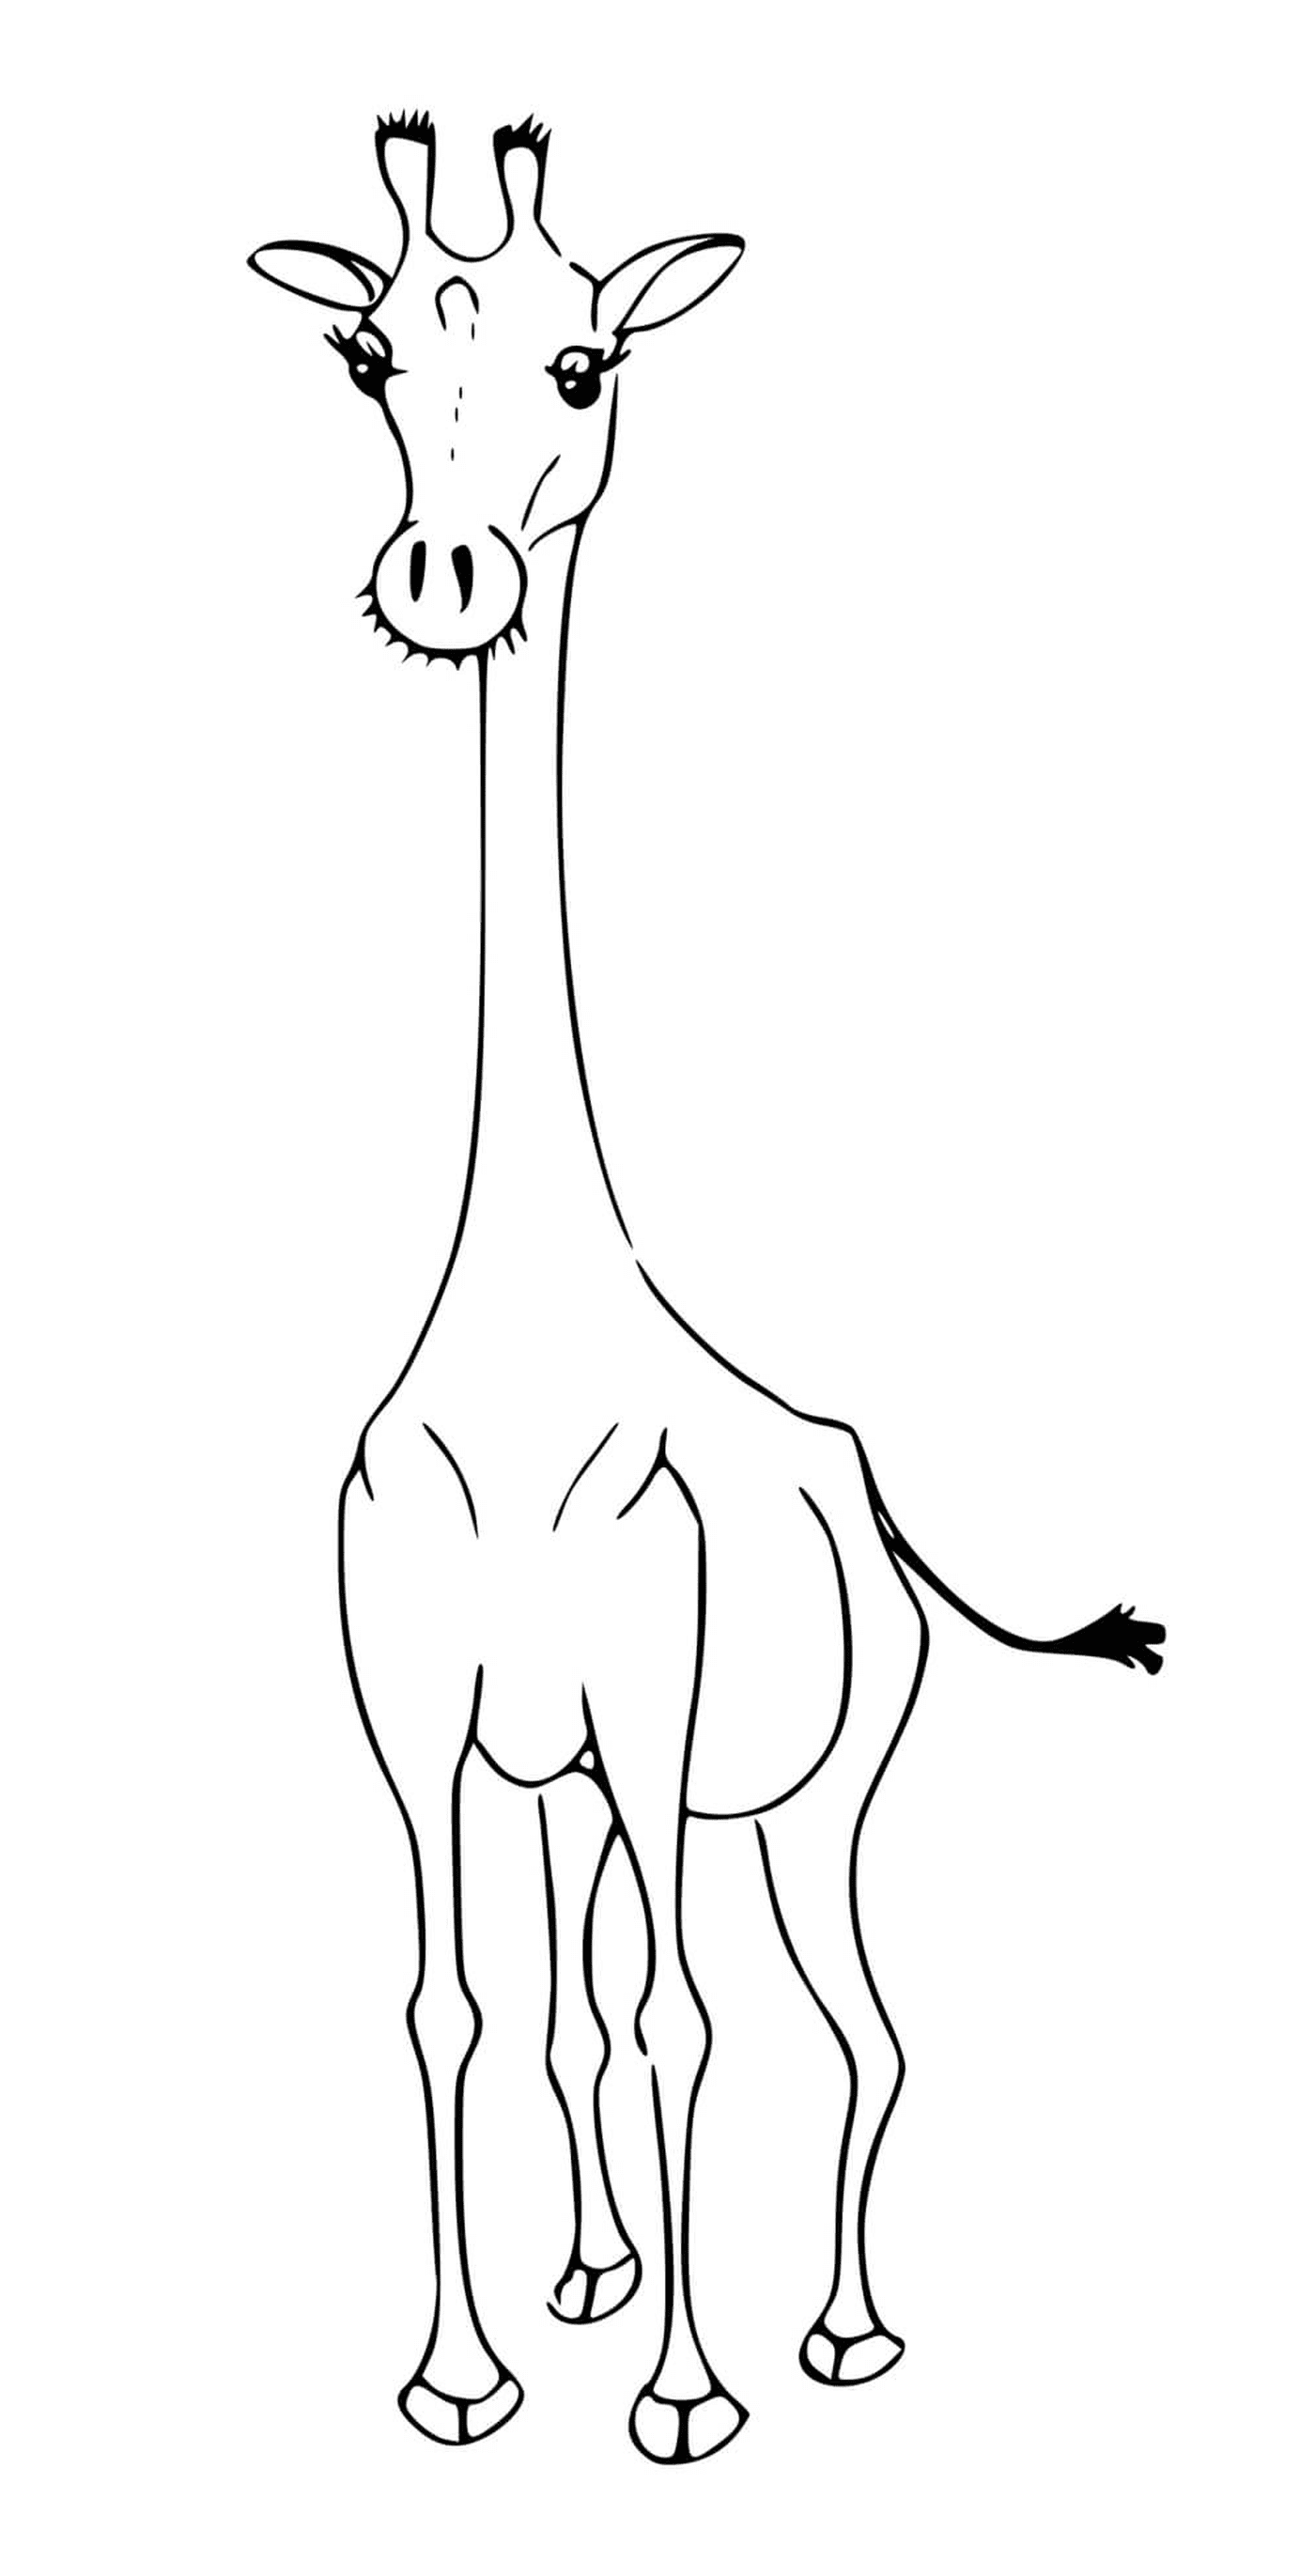  A giraffe without its characteristic spots 